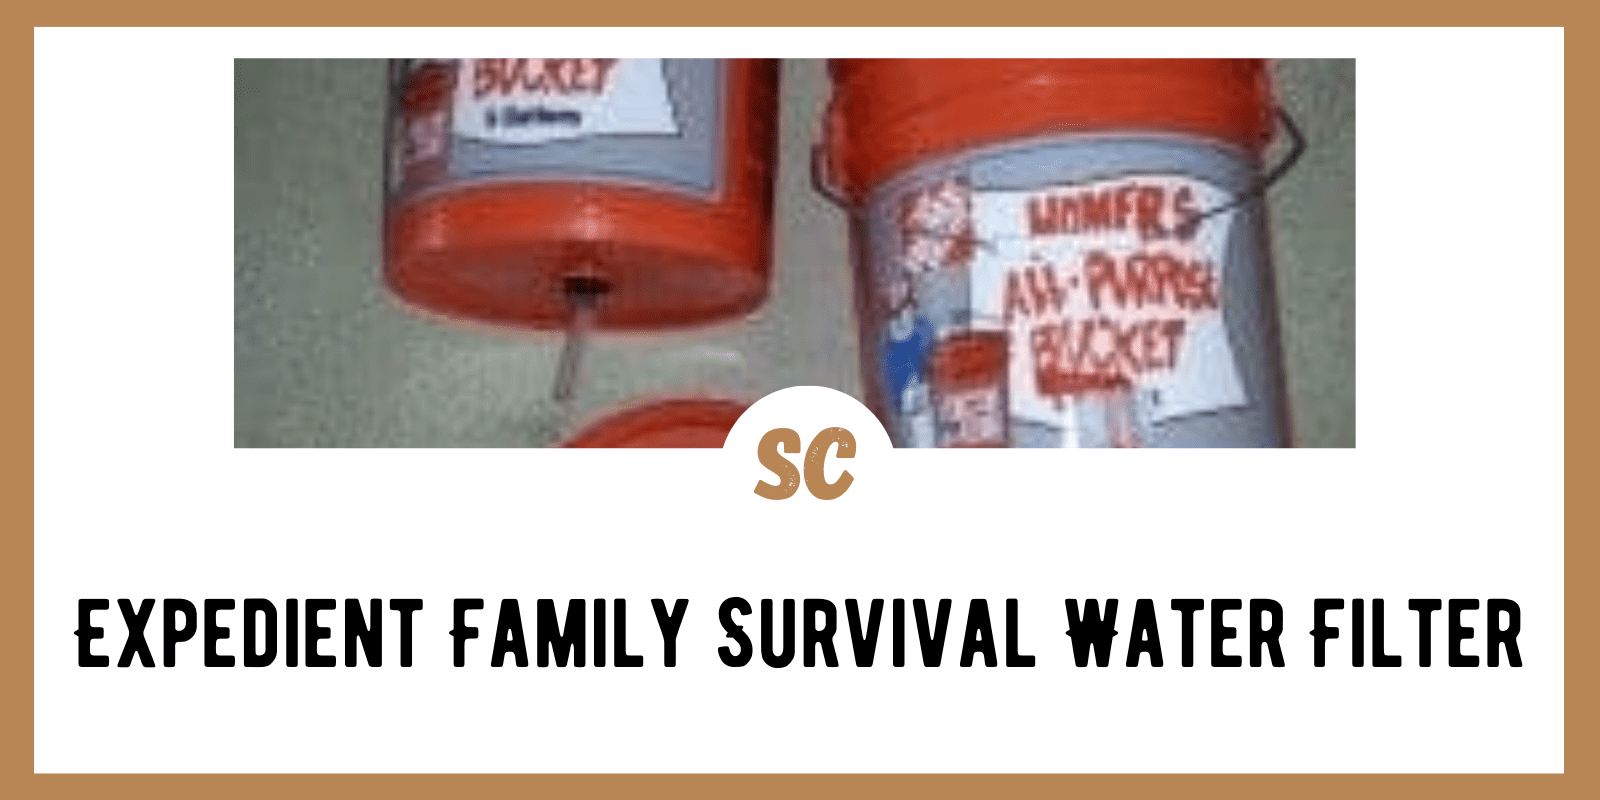 Expedient Family Survival Water Filter